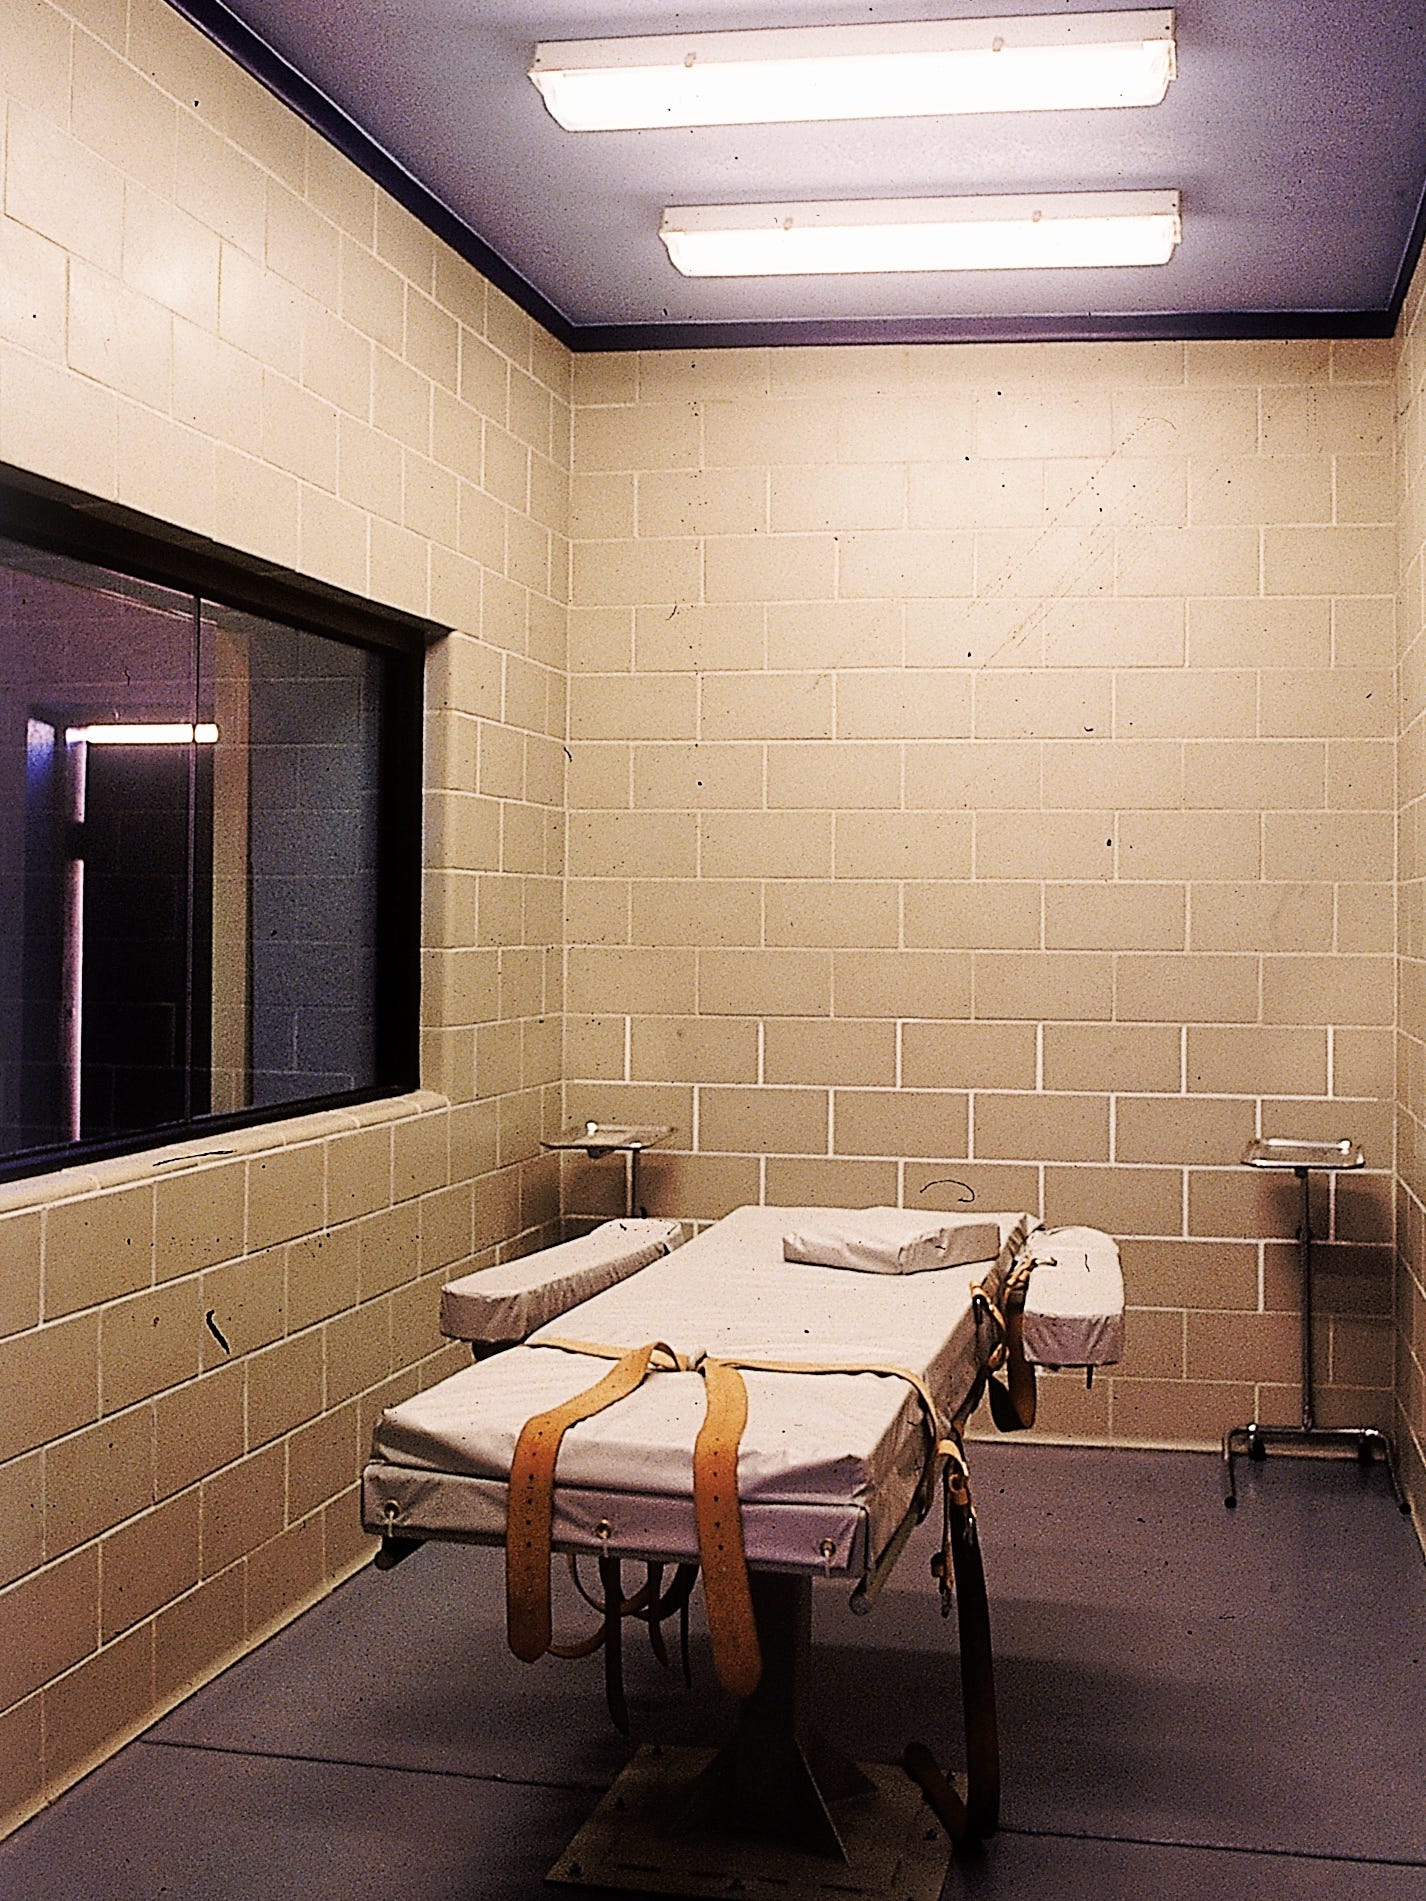 Arizona attorneys have asked the U.S. Supreme Court to consider whether state statutes give too much discretion to prosecutors to determine which murders deserve to be punished by a death penalty, and whether the inability of certain counties to fund capital trials violates the due process clause of the Constitution.